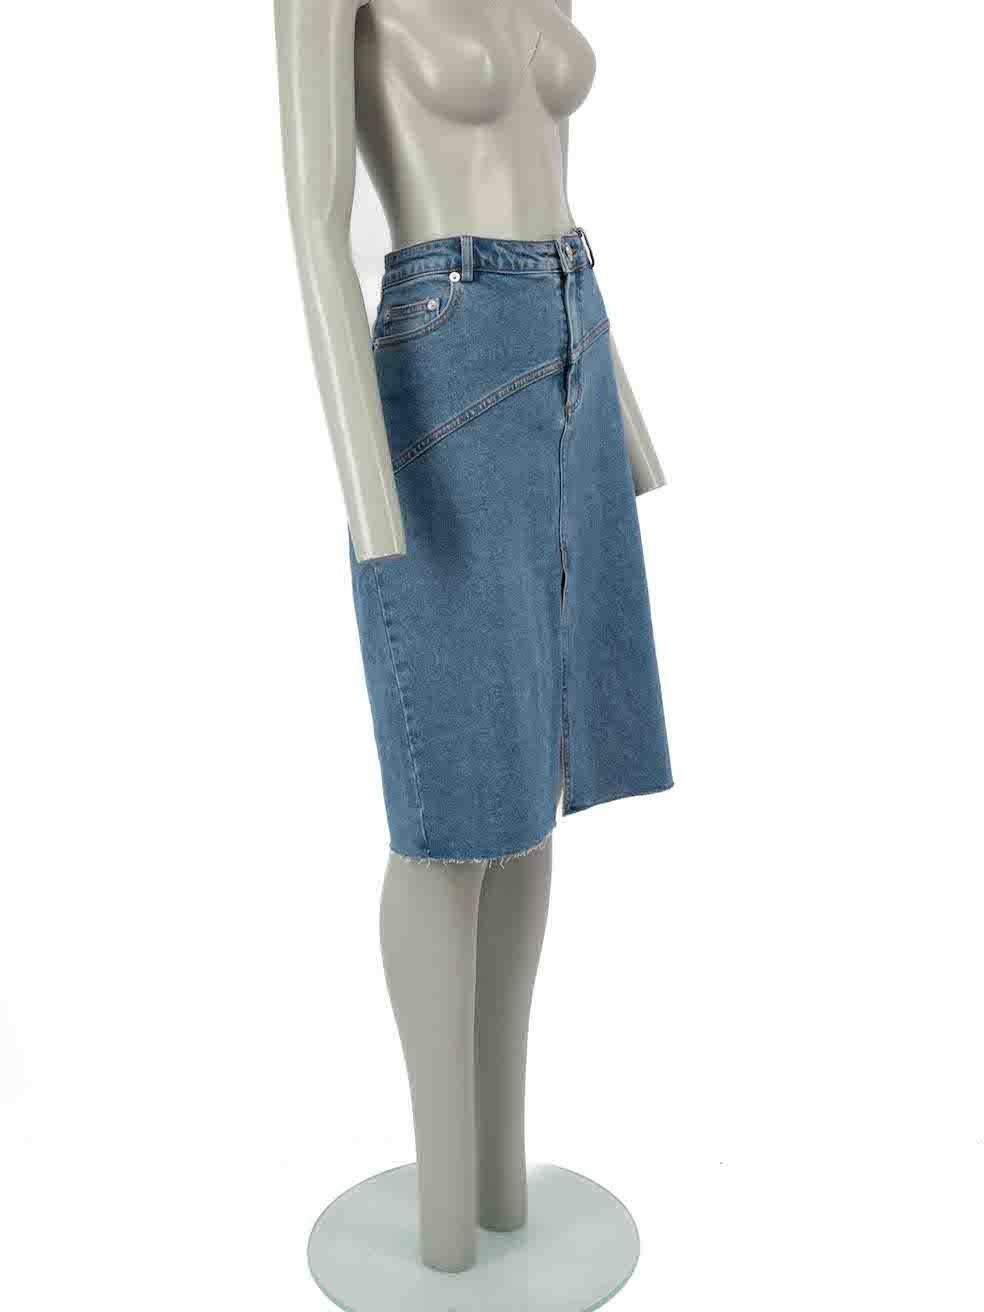 CONDITION is Very good. Hardly any visible wear to skirt is evident on this used STAUD designer resale item.
 
Details
Blue
Denim
Fitted skirt
Knee length
Front zip closure with button
Belt hoops
2x Front side pockets
1x Back pocket
Front